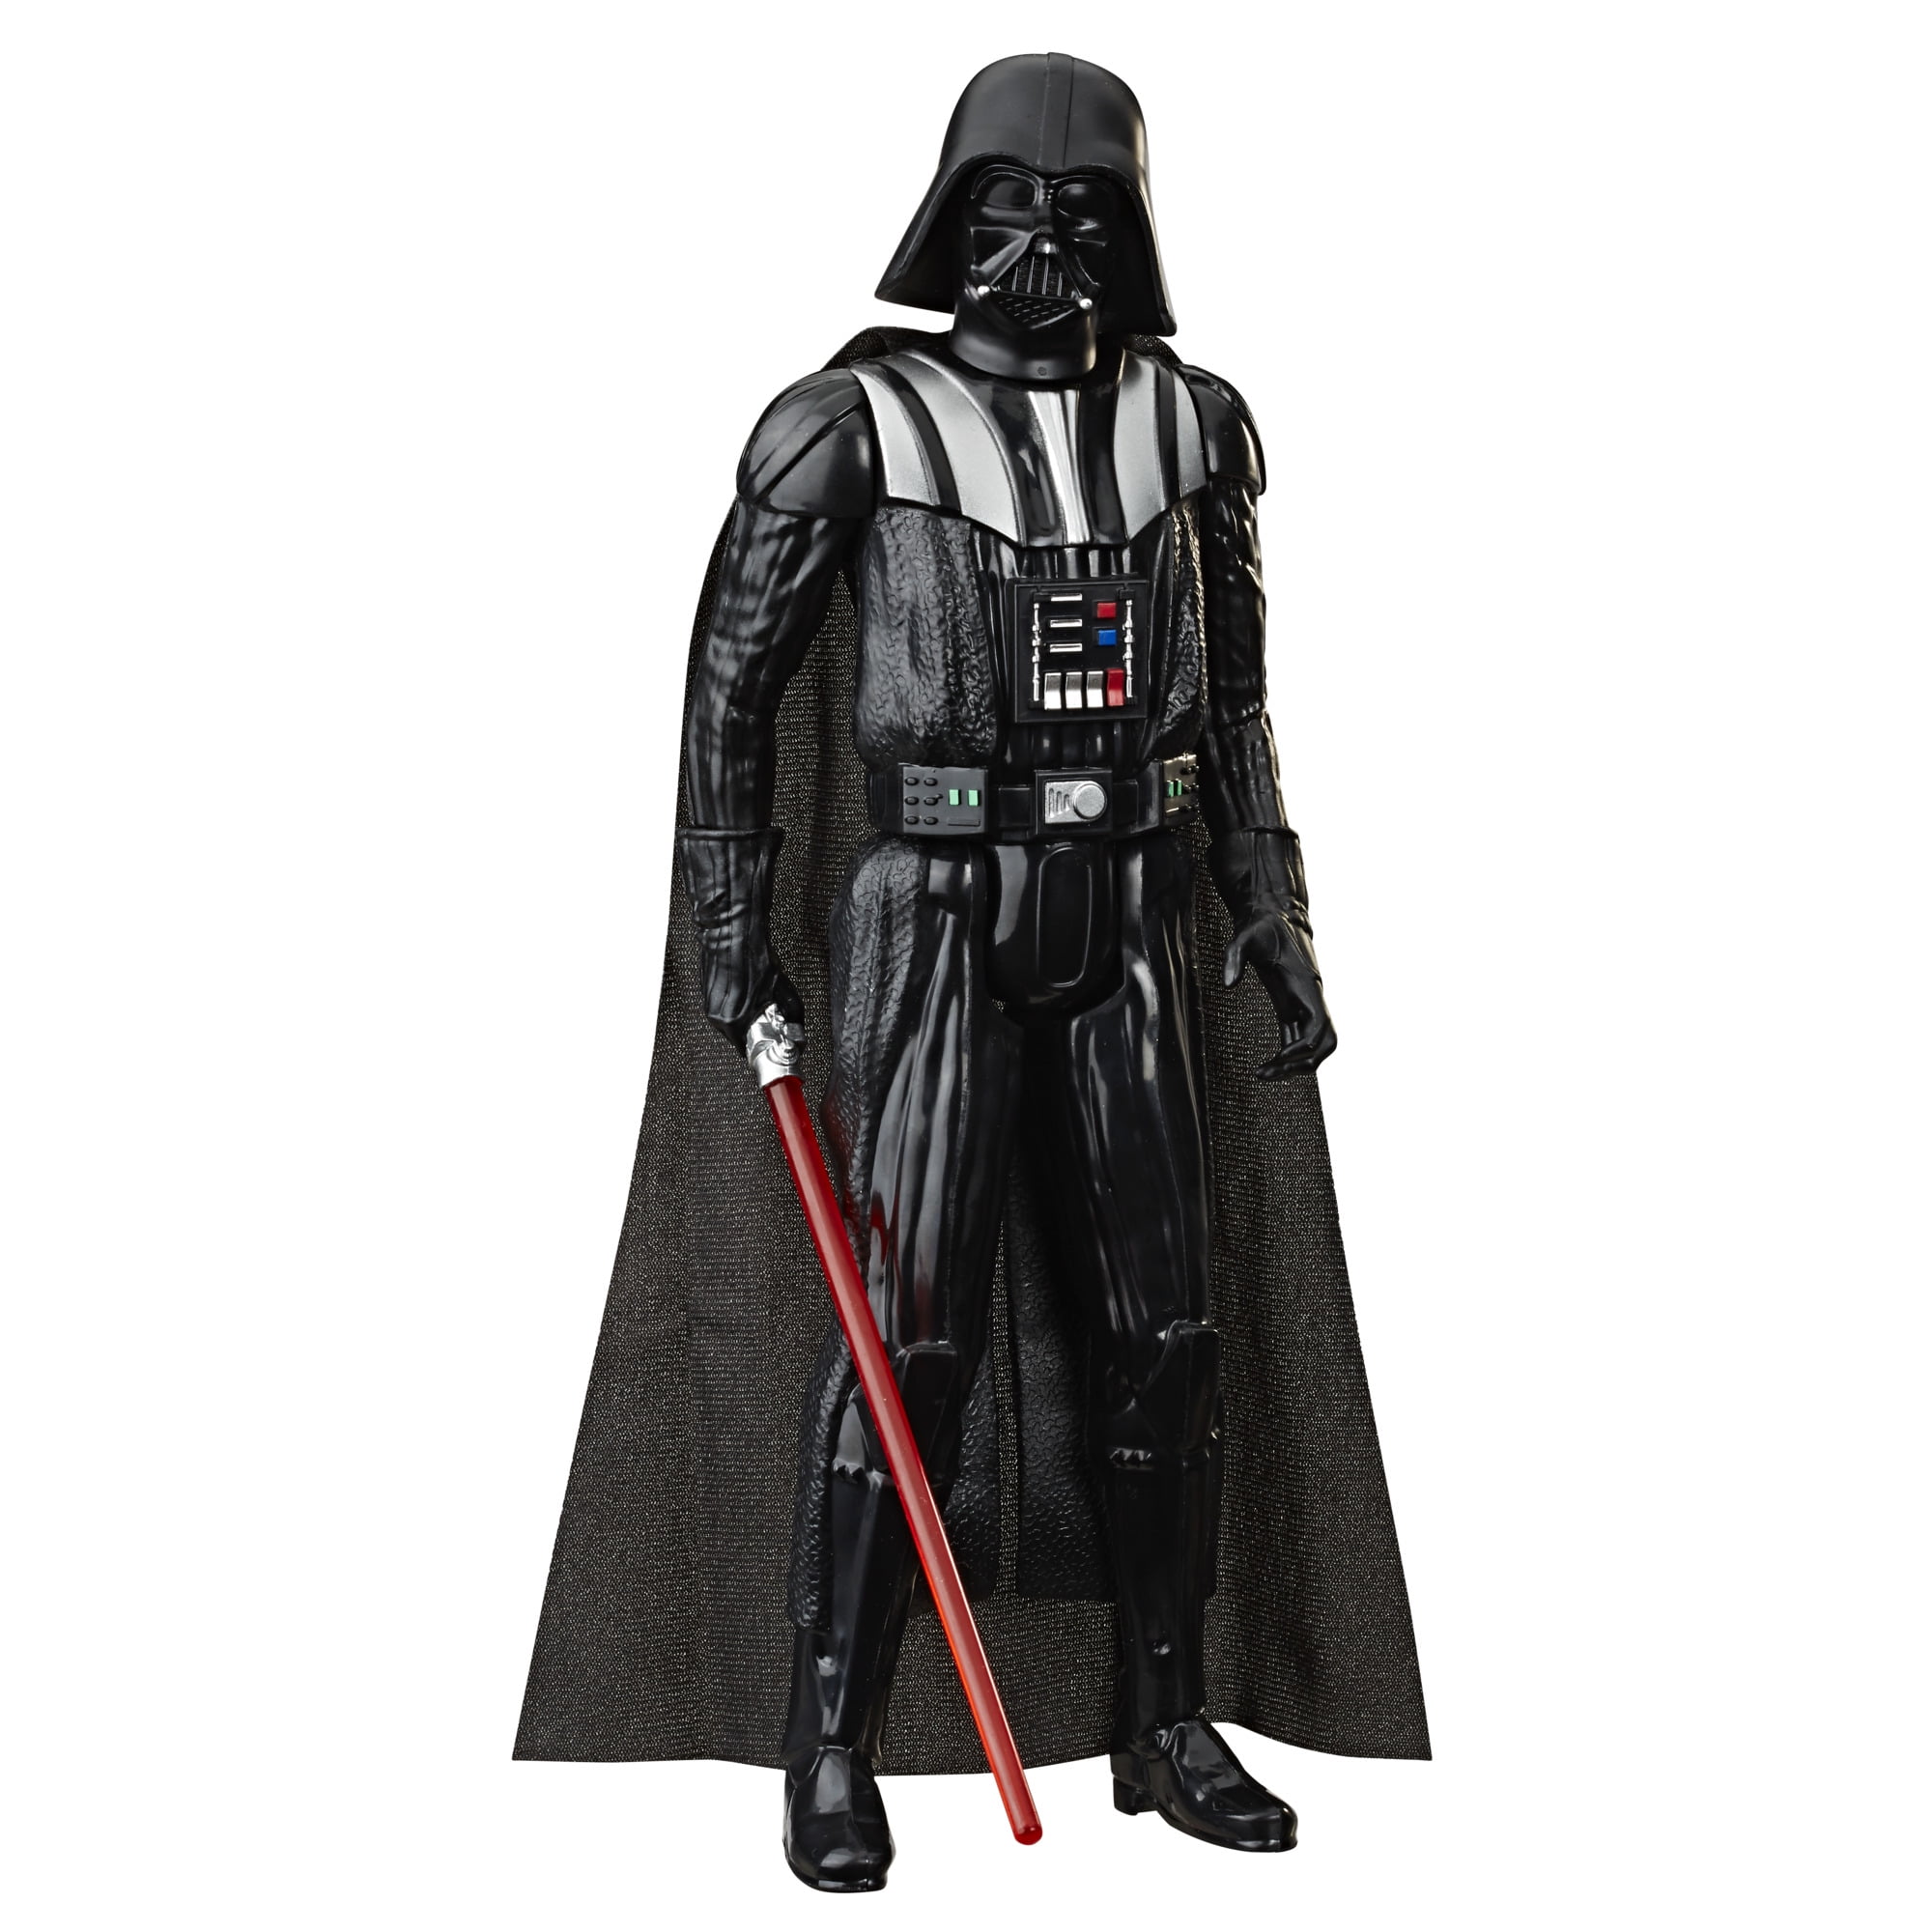 Hasbro Star Wars Hero Series Darth Vader Toy 12-inch Scale Action Figure for sale online 